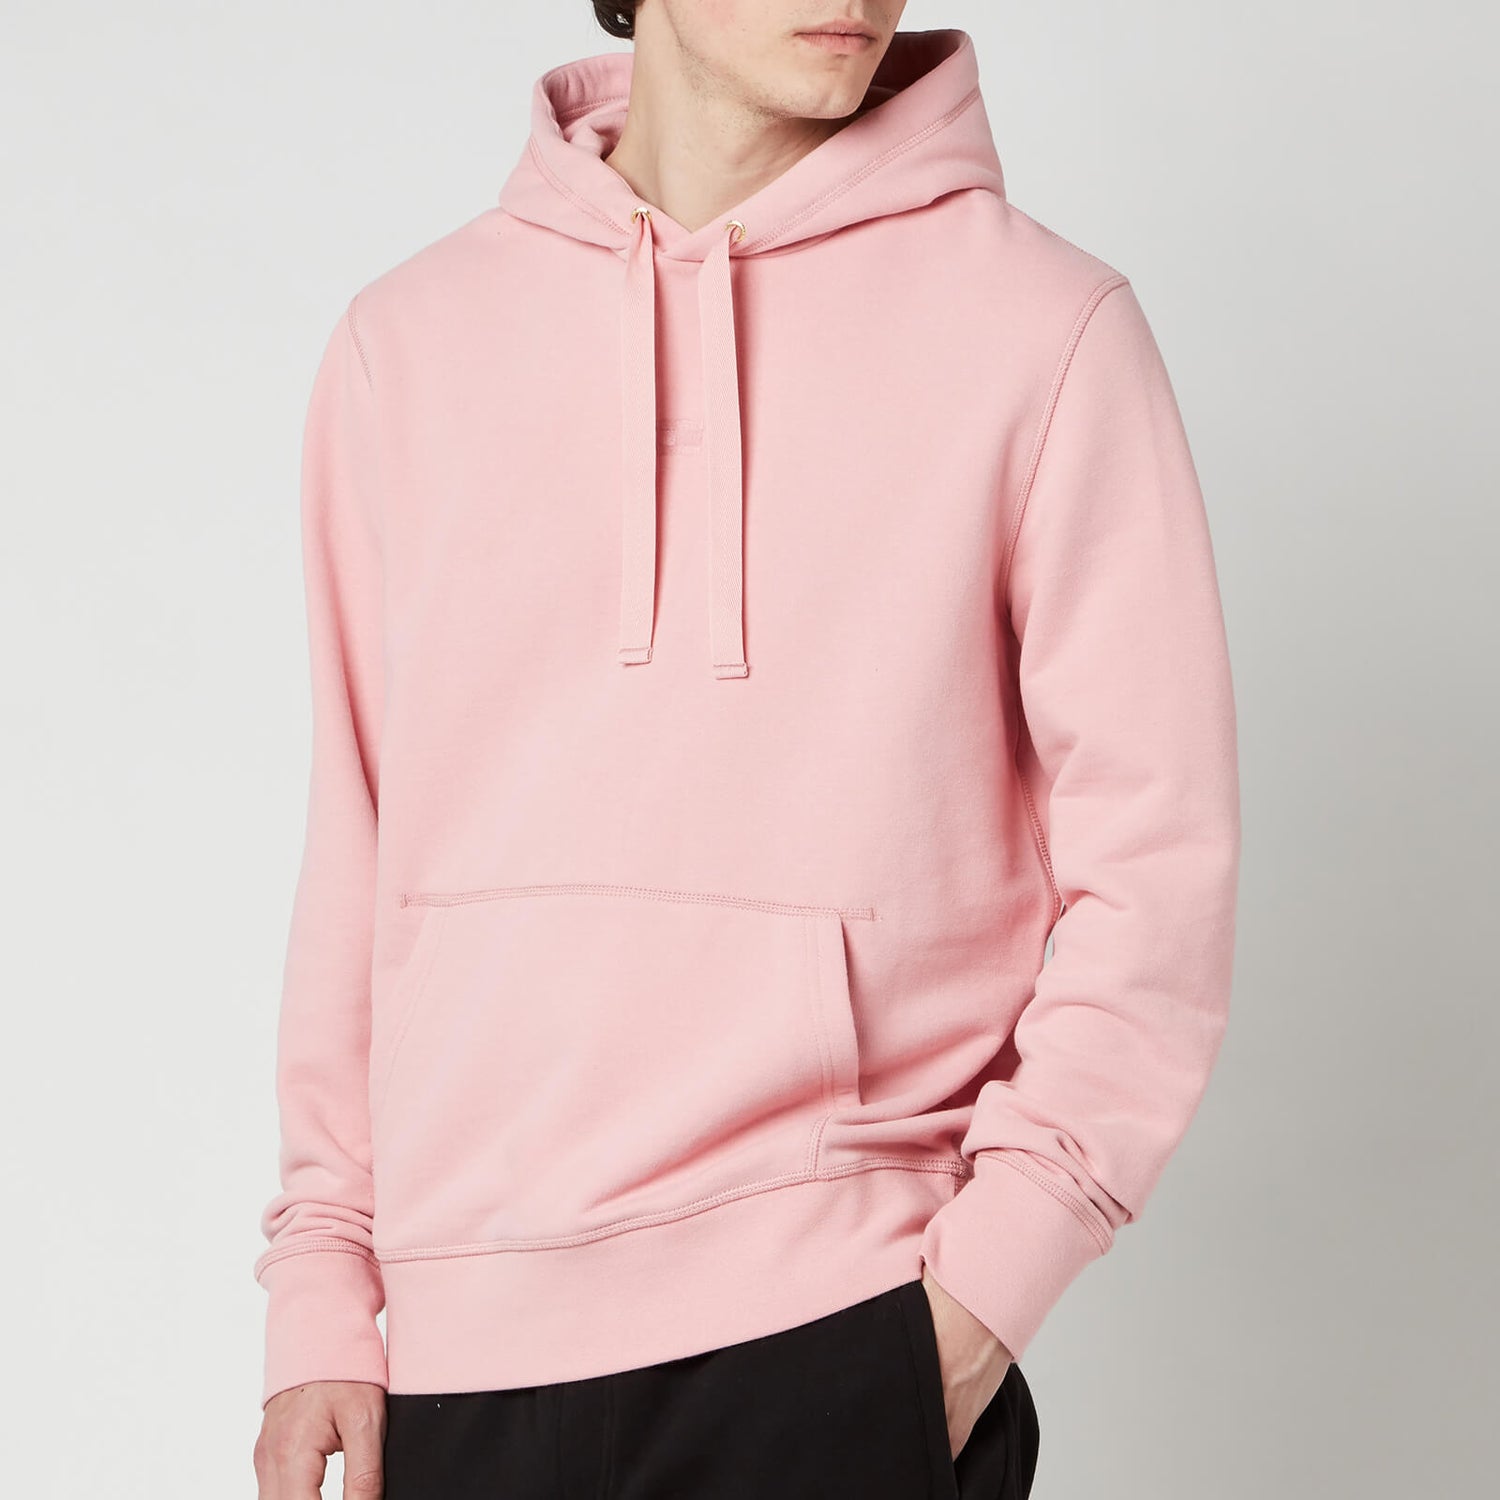 Tommy Hilfiger Men's Recycled Cotton Pullover Hoodie - Glacier Pink